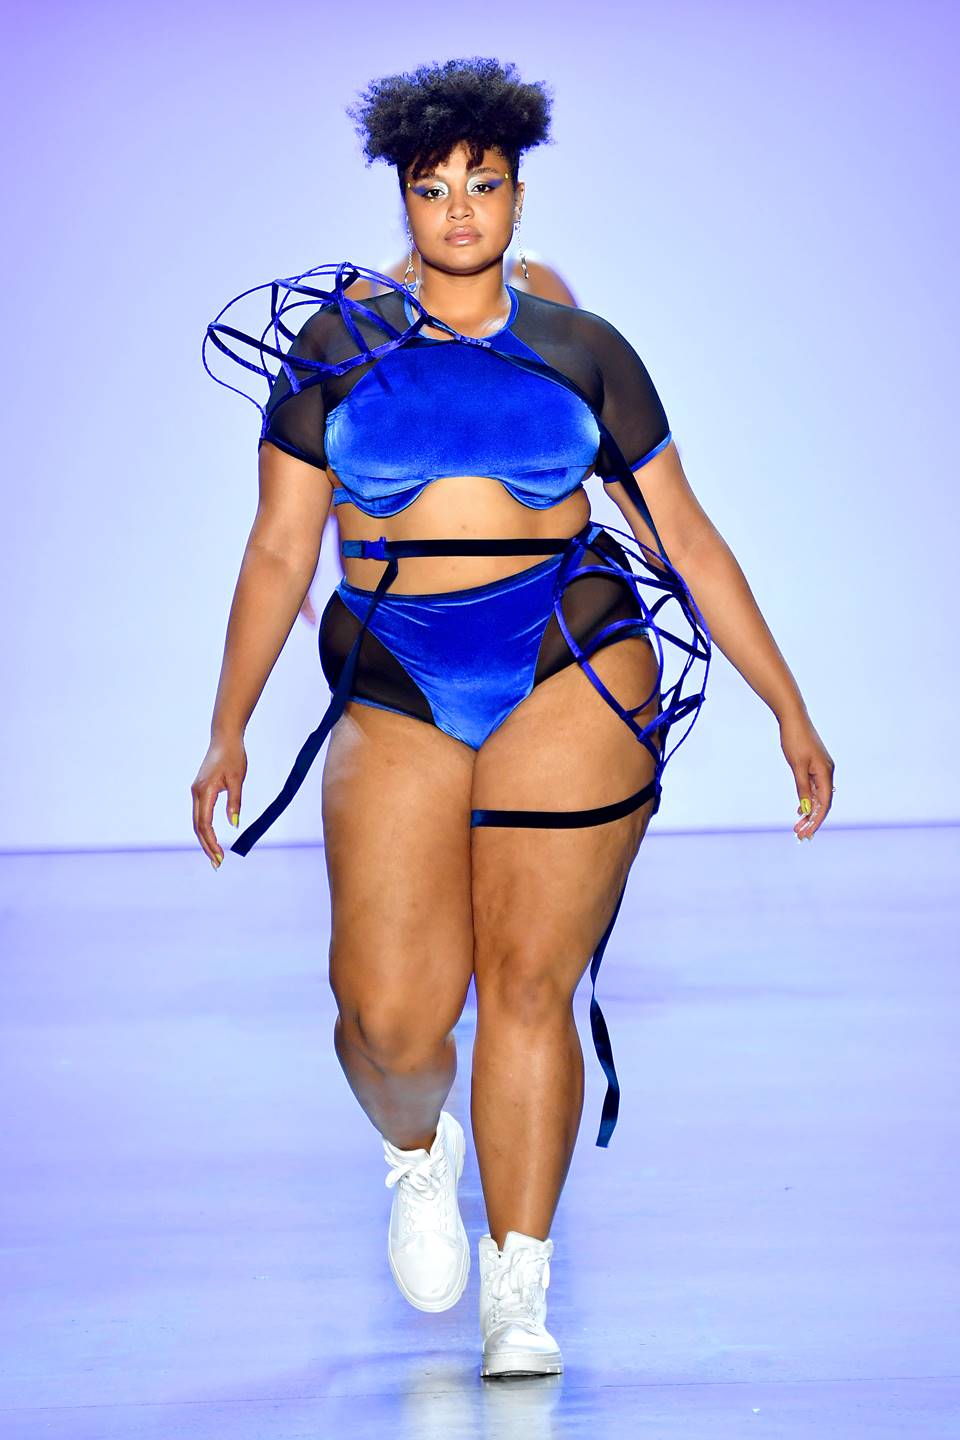 Mike Coppola/Getty Images for Chromat via Getty Images